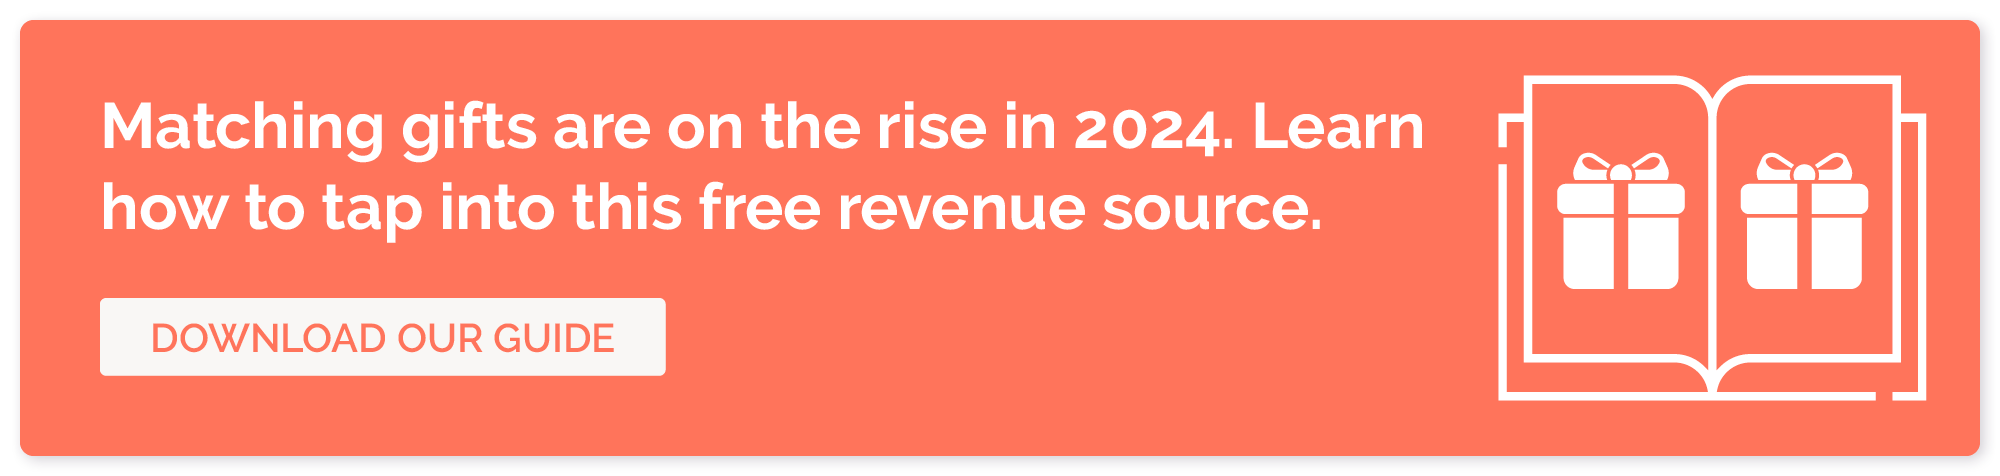 Matching gifts are on the rise in 2024. Learn how to tap into this free revenue source. Download our guide.